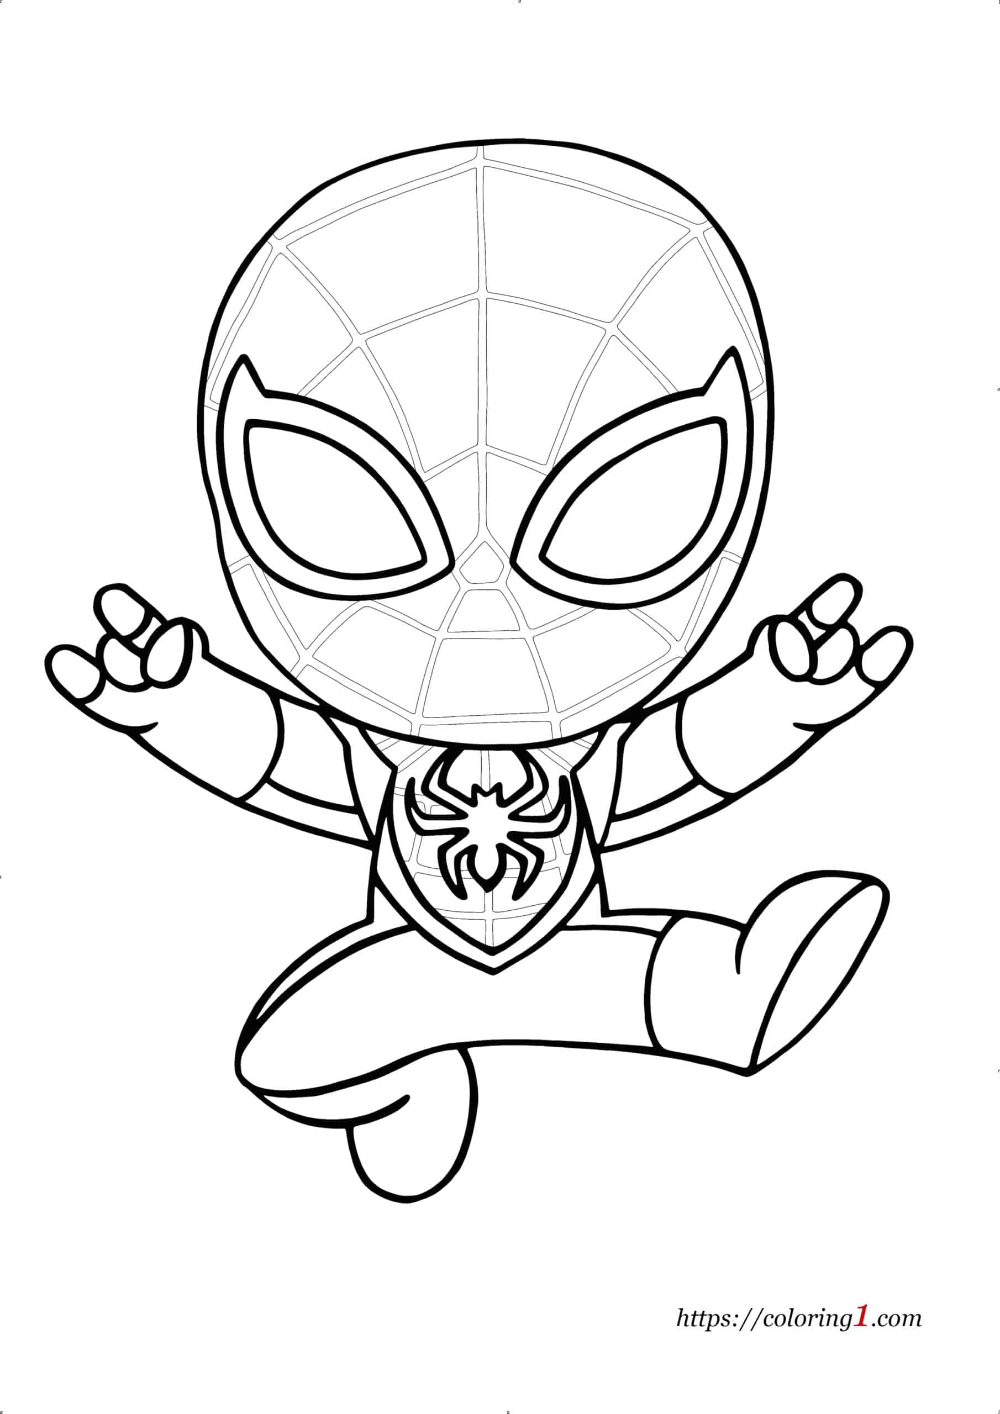 Cute miles morales spiderman coloring pages